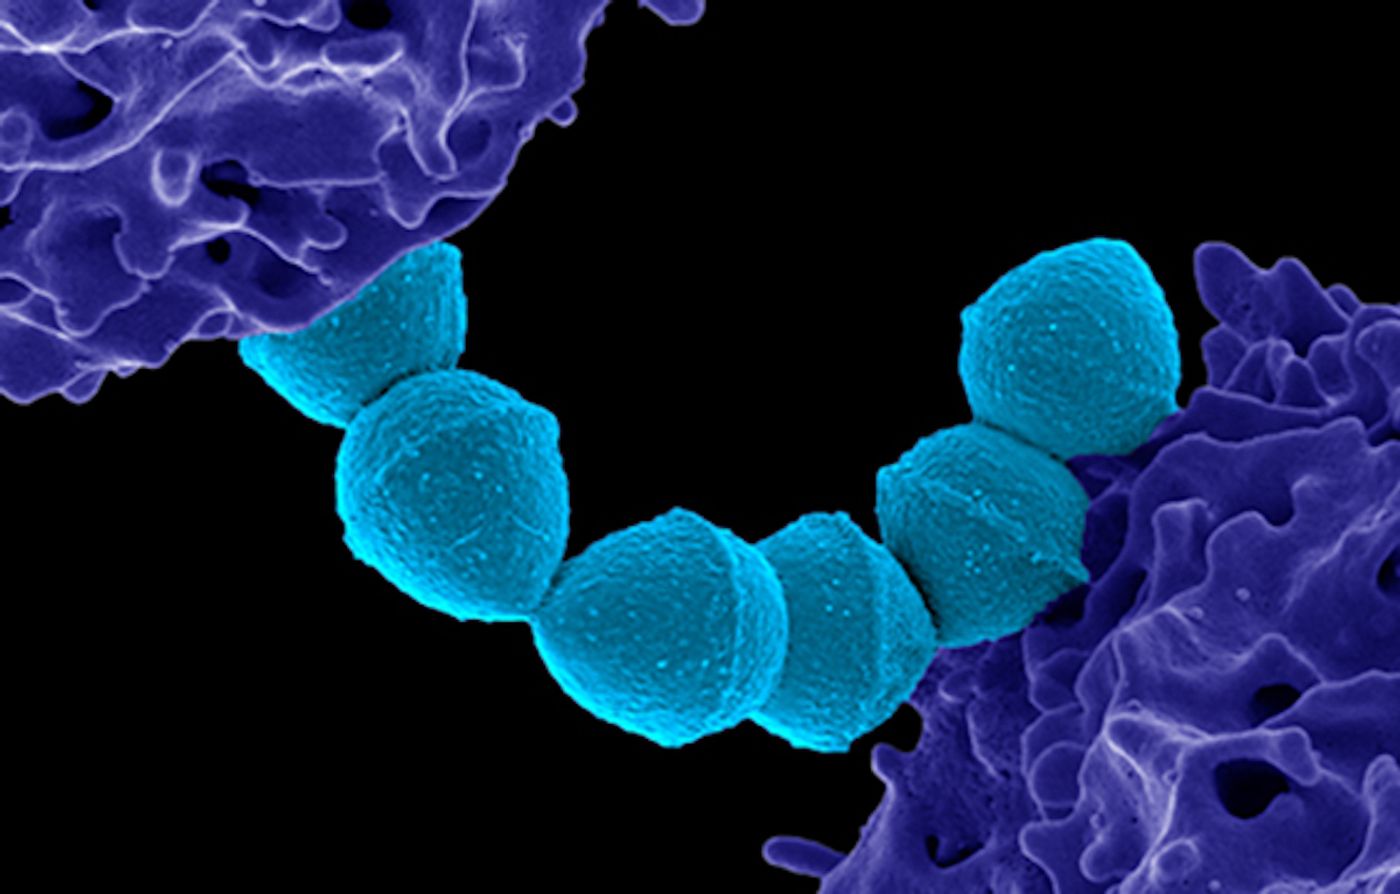 Colorized scanning electron micrograph of Group A Streptococcus (Streptococcus pyogenes) bacteria (blue) and a human neutrophil (purple). Credit: NIAID